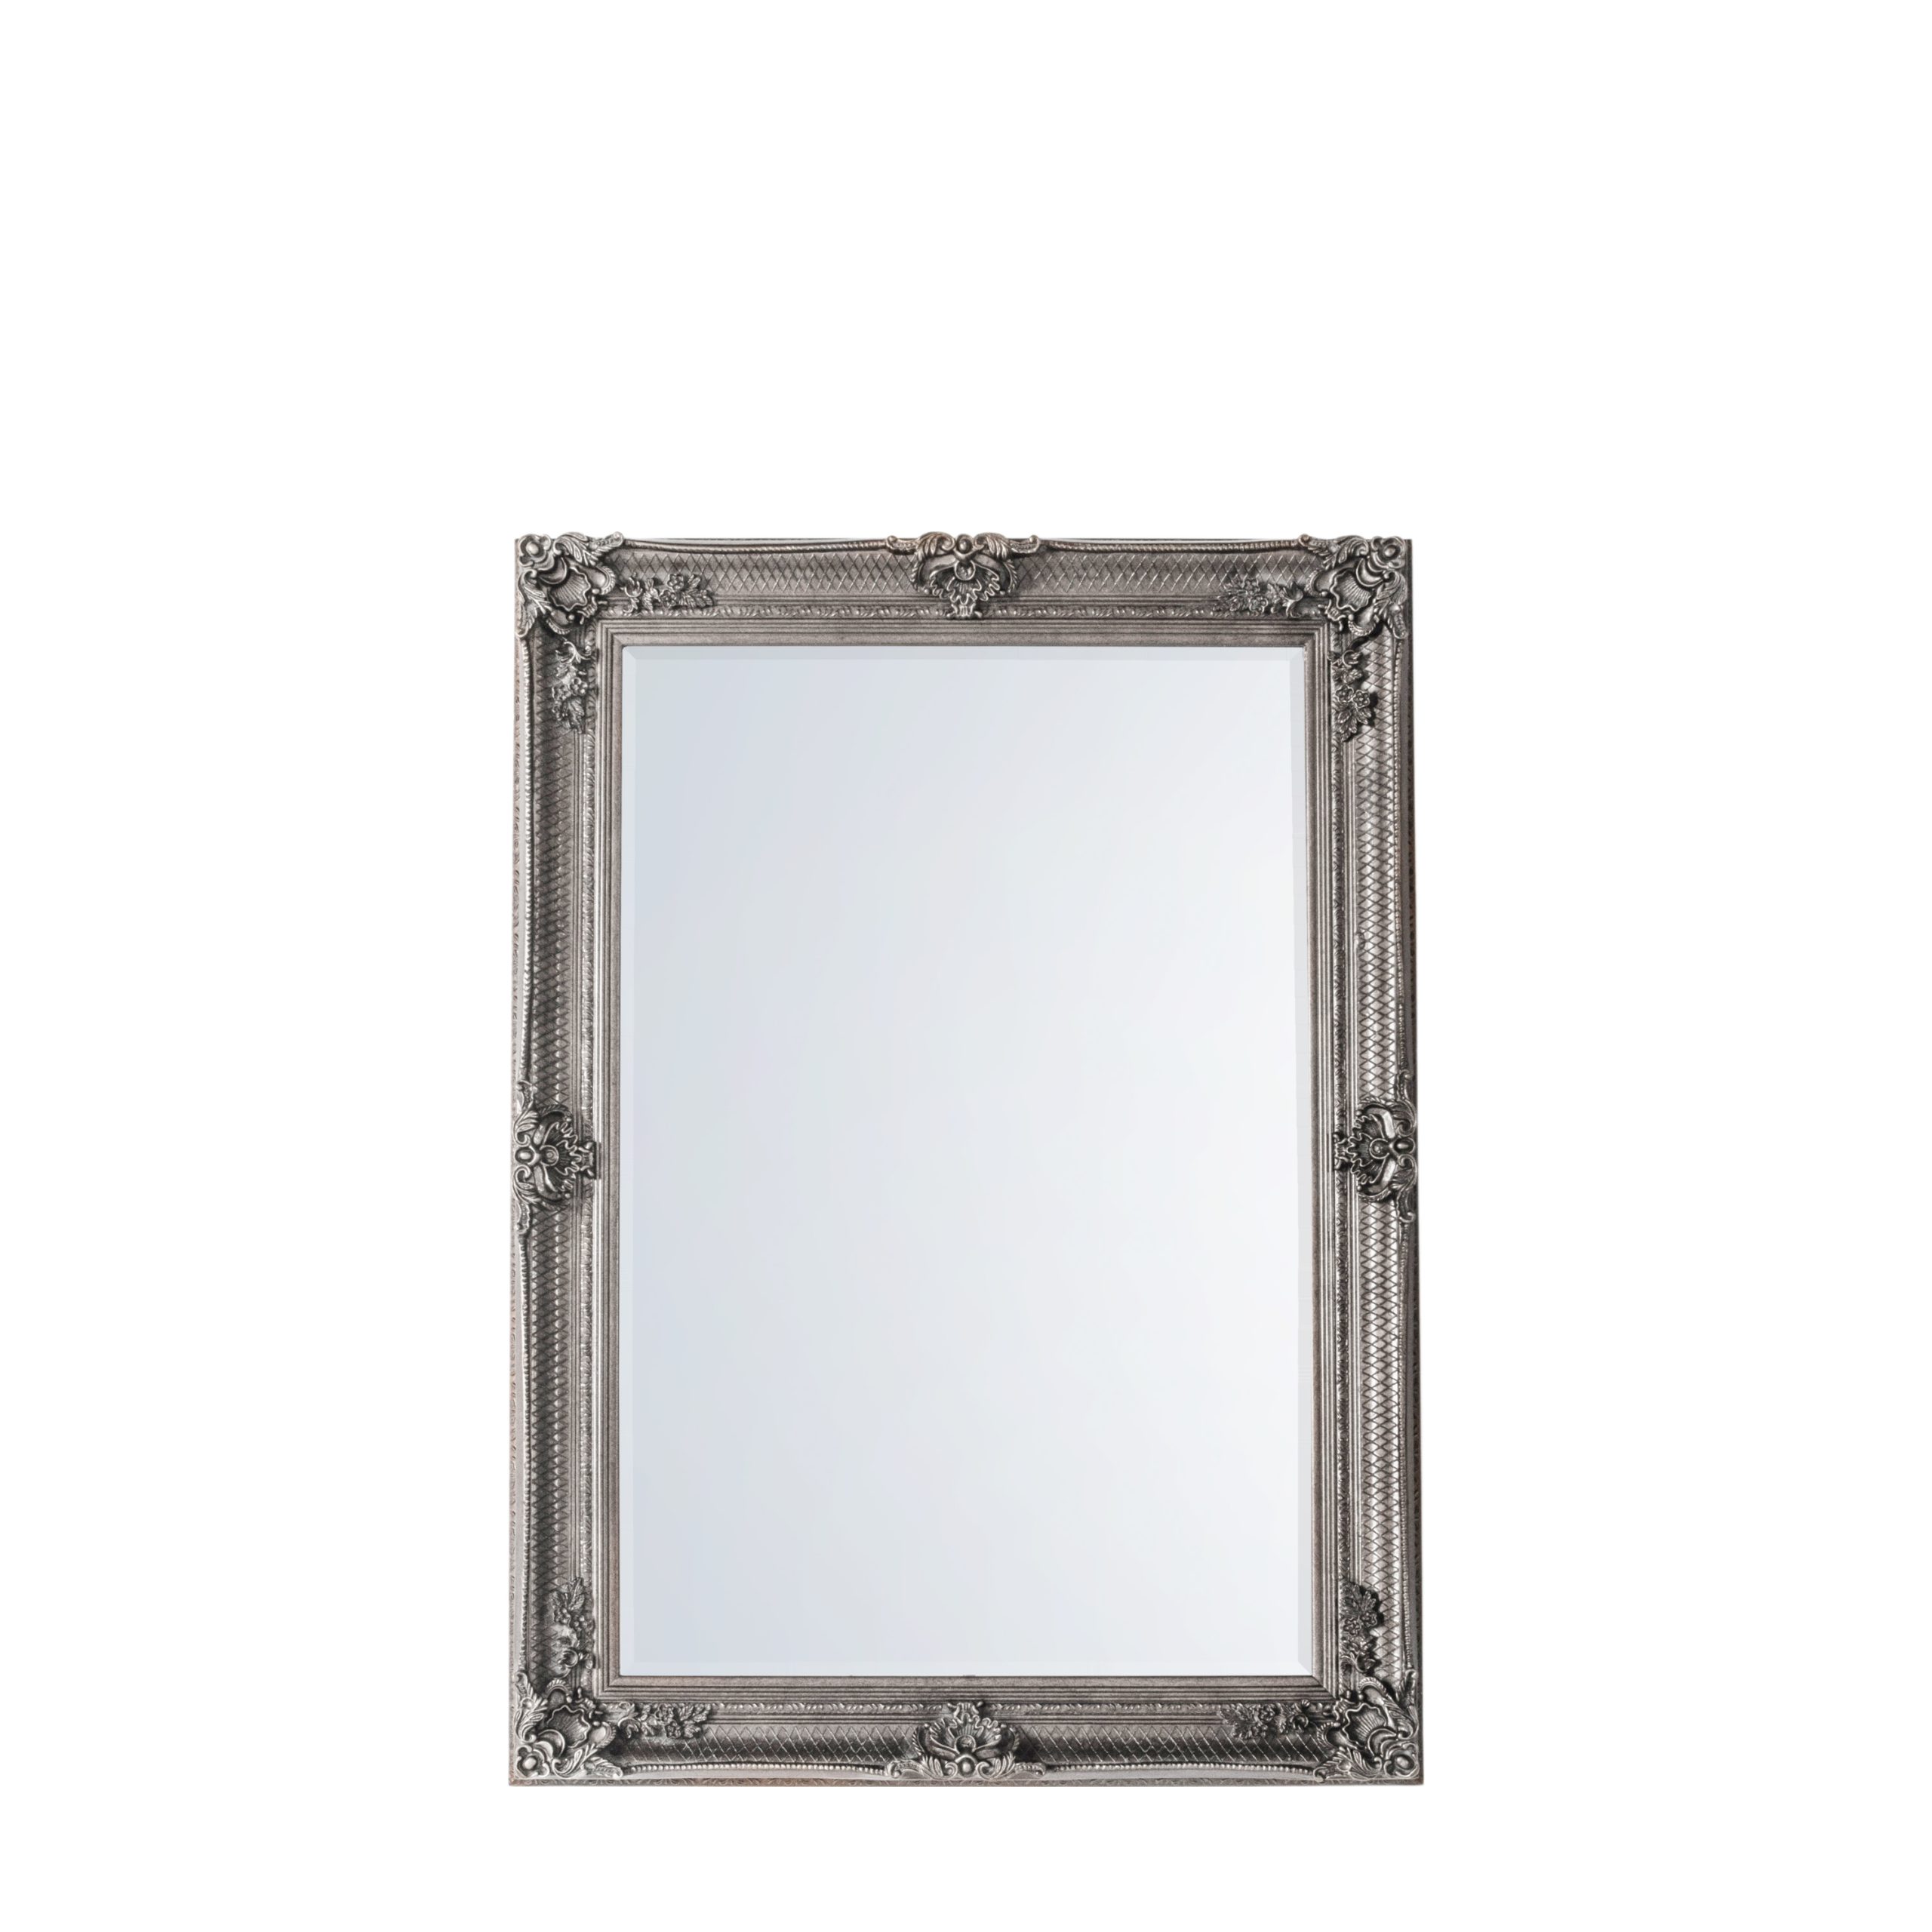 Gallery Direct Abbey Rectangle Mirror Silver